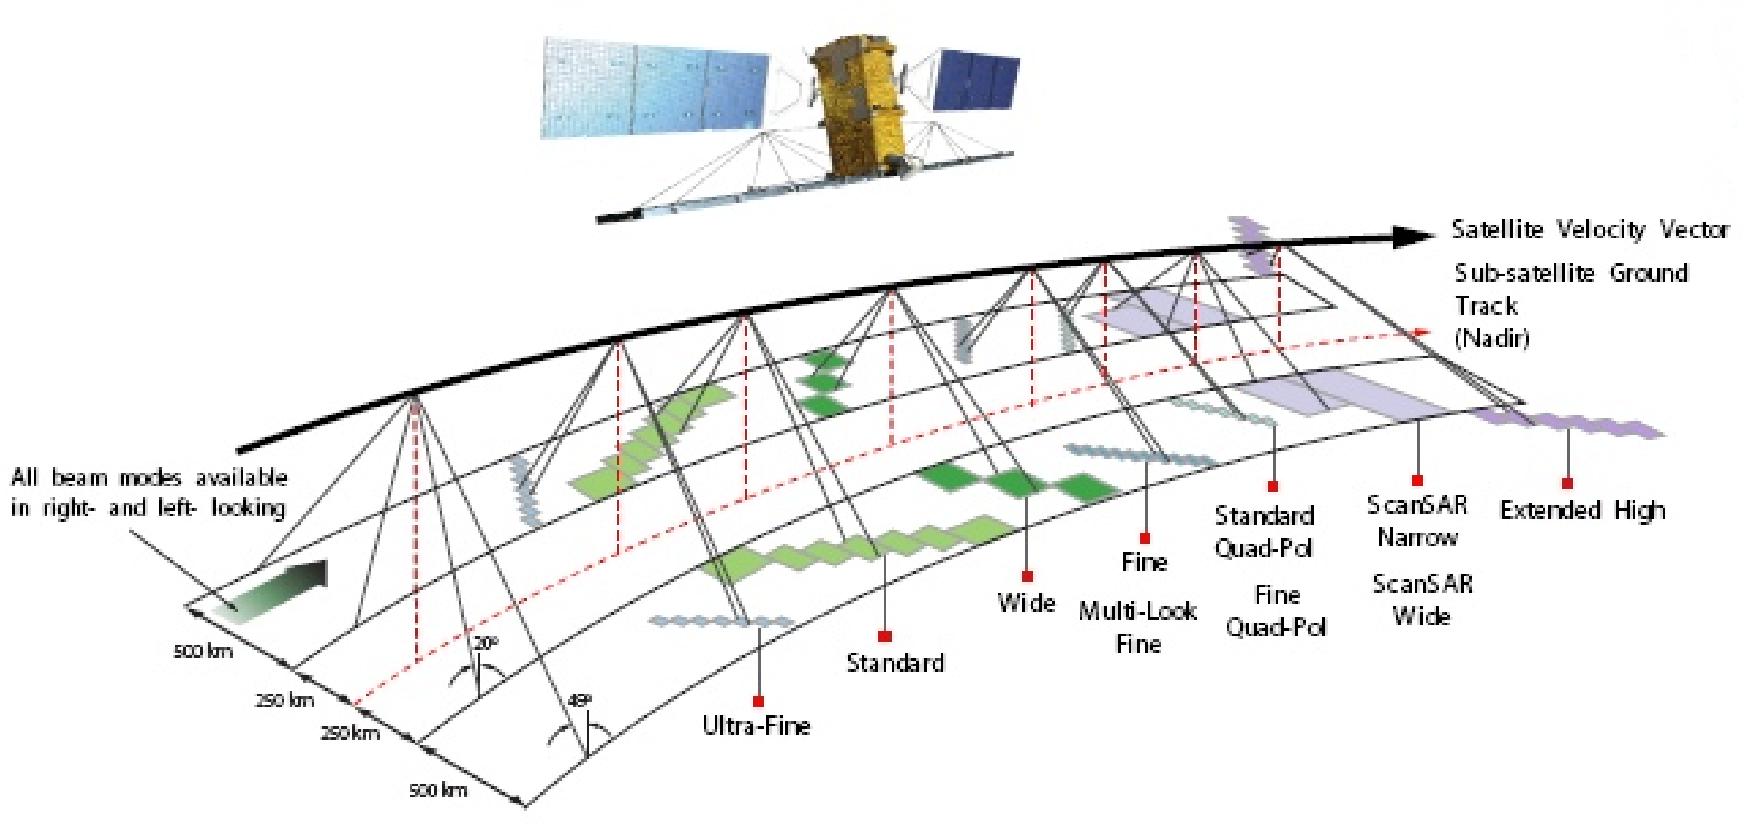 Figure 33: Some observation geometries and coverage modes of RADARSAT-2 (image credit: MDA)